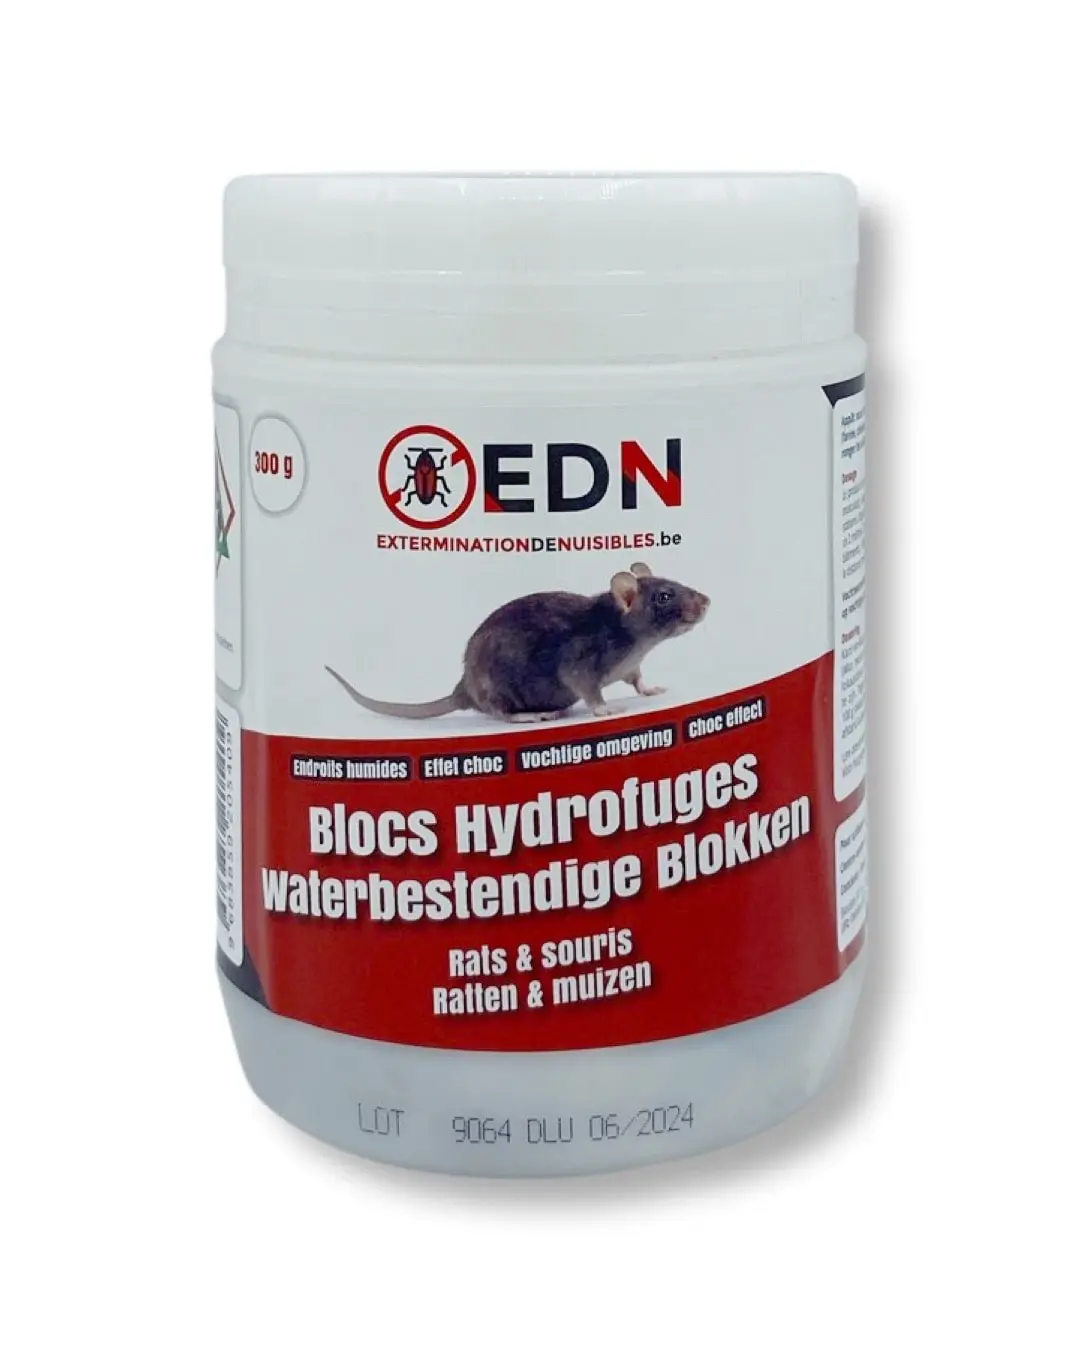 Blocs attractifs hydrofuges anti-rongeurs, 300 g - EDN, EDN